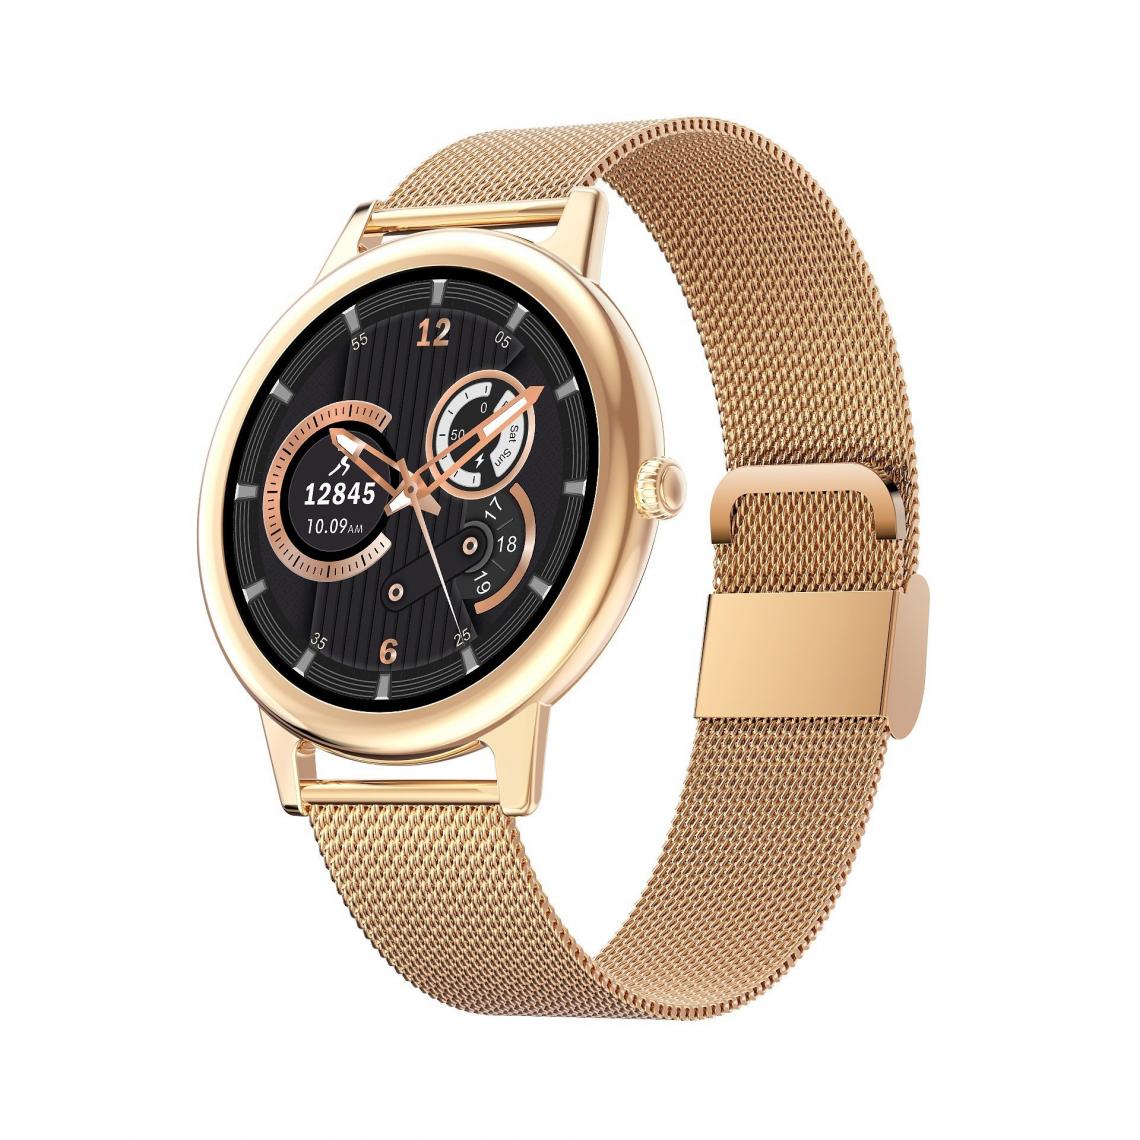 Chronotech Montres - Chronus Smart Watches for Men Women Full Touch Screen Ip67 Waterproof for Android and iOS Phones(gold) - Montre connectée